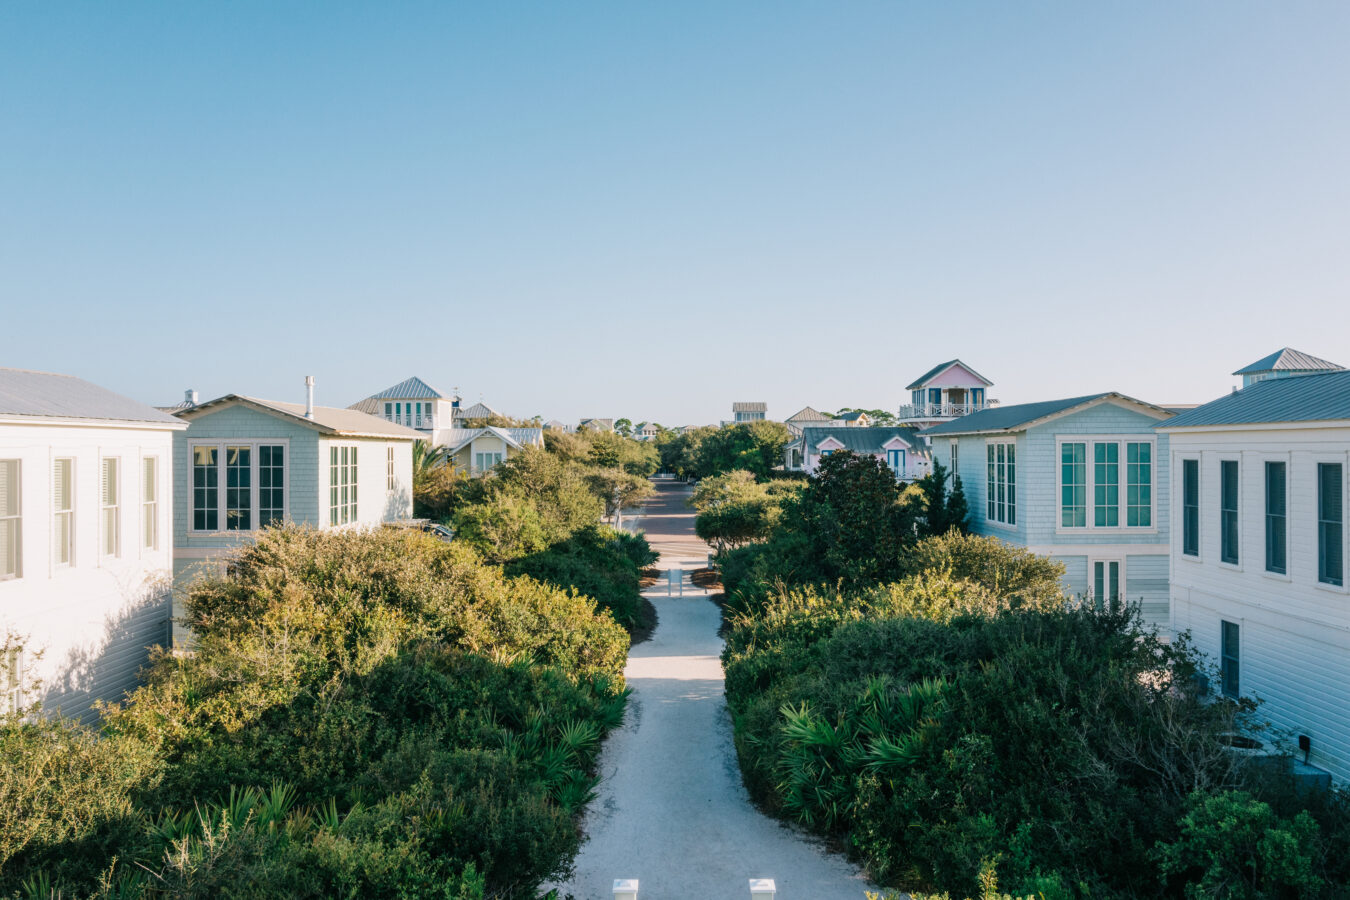 Homes in the Seaside community separated by a pathway and vegetation in Florida